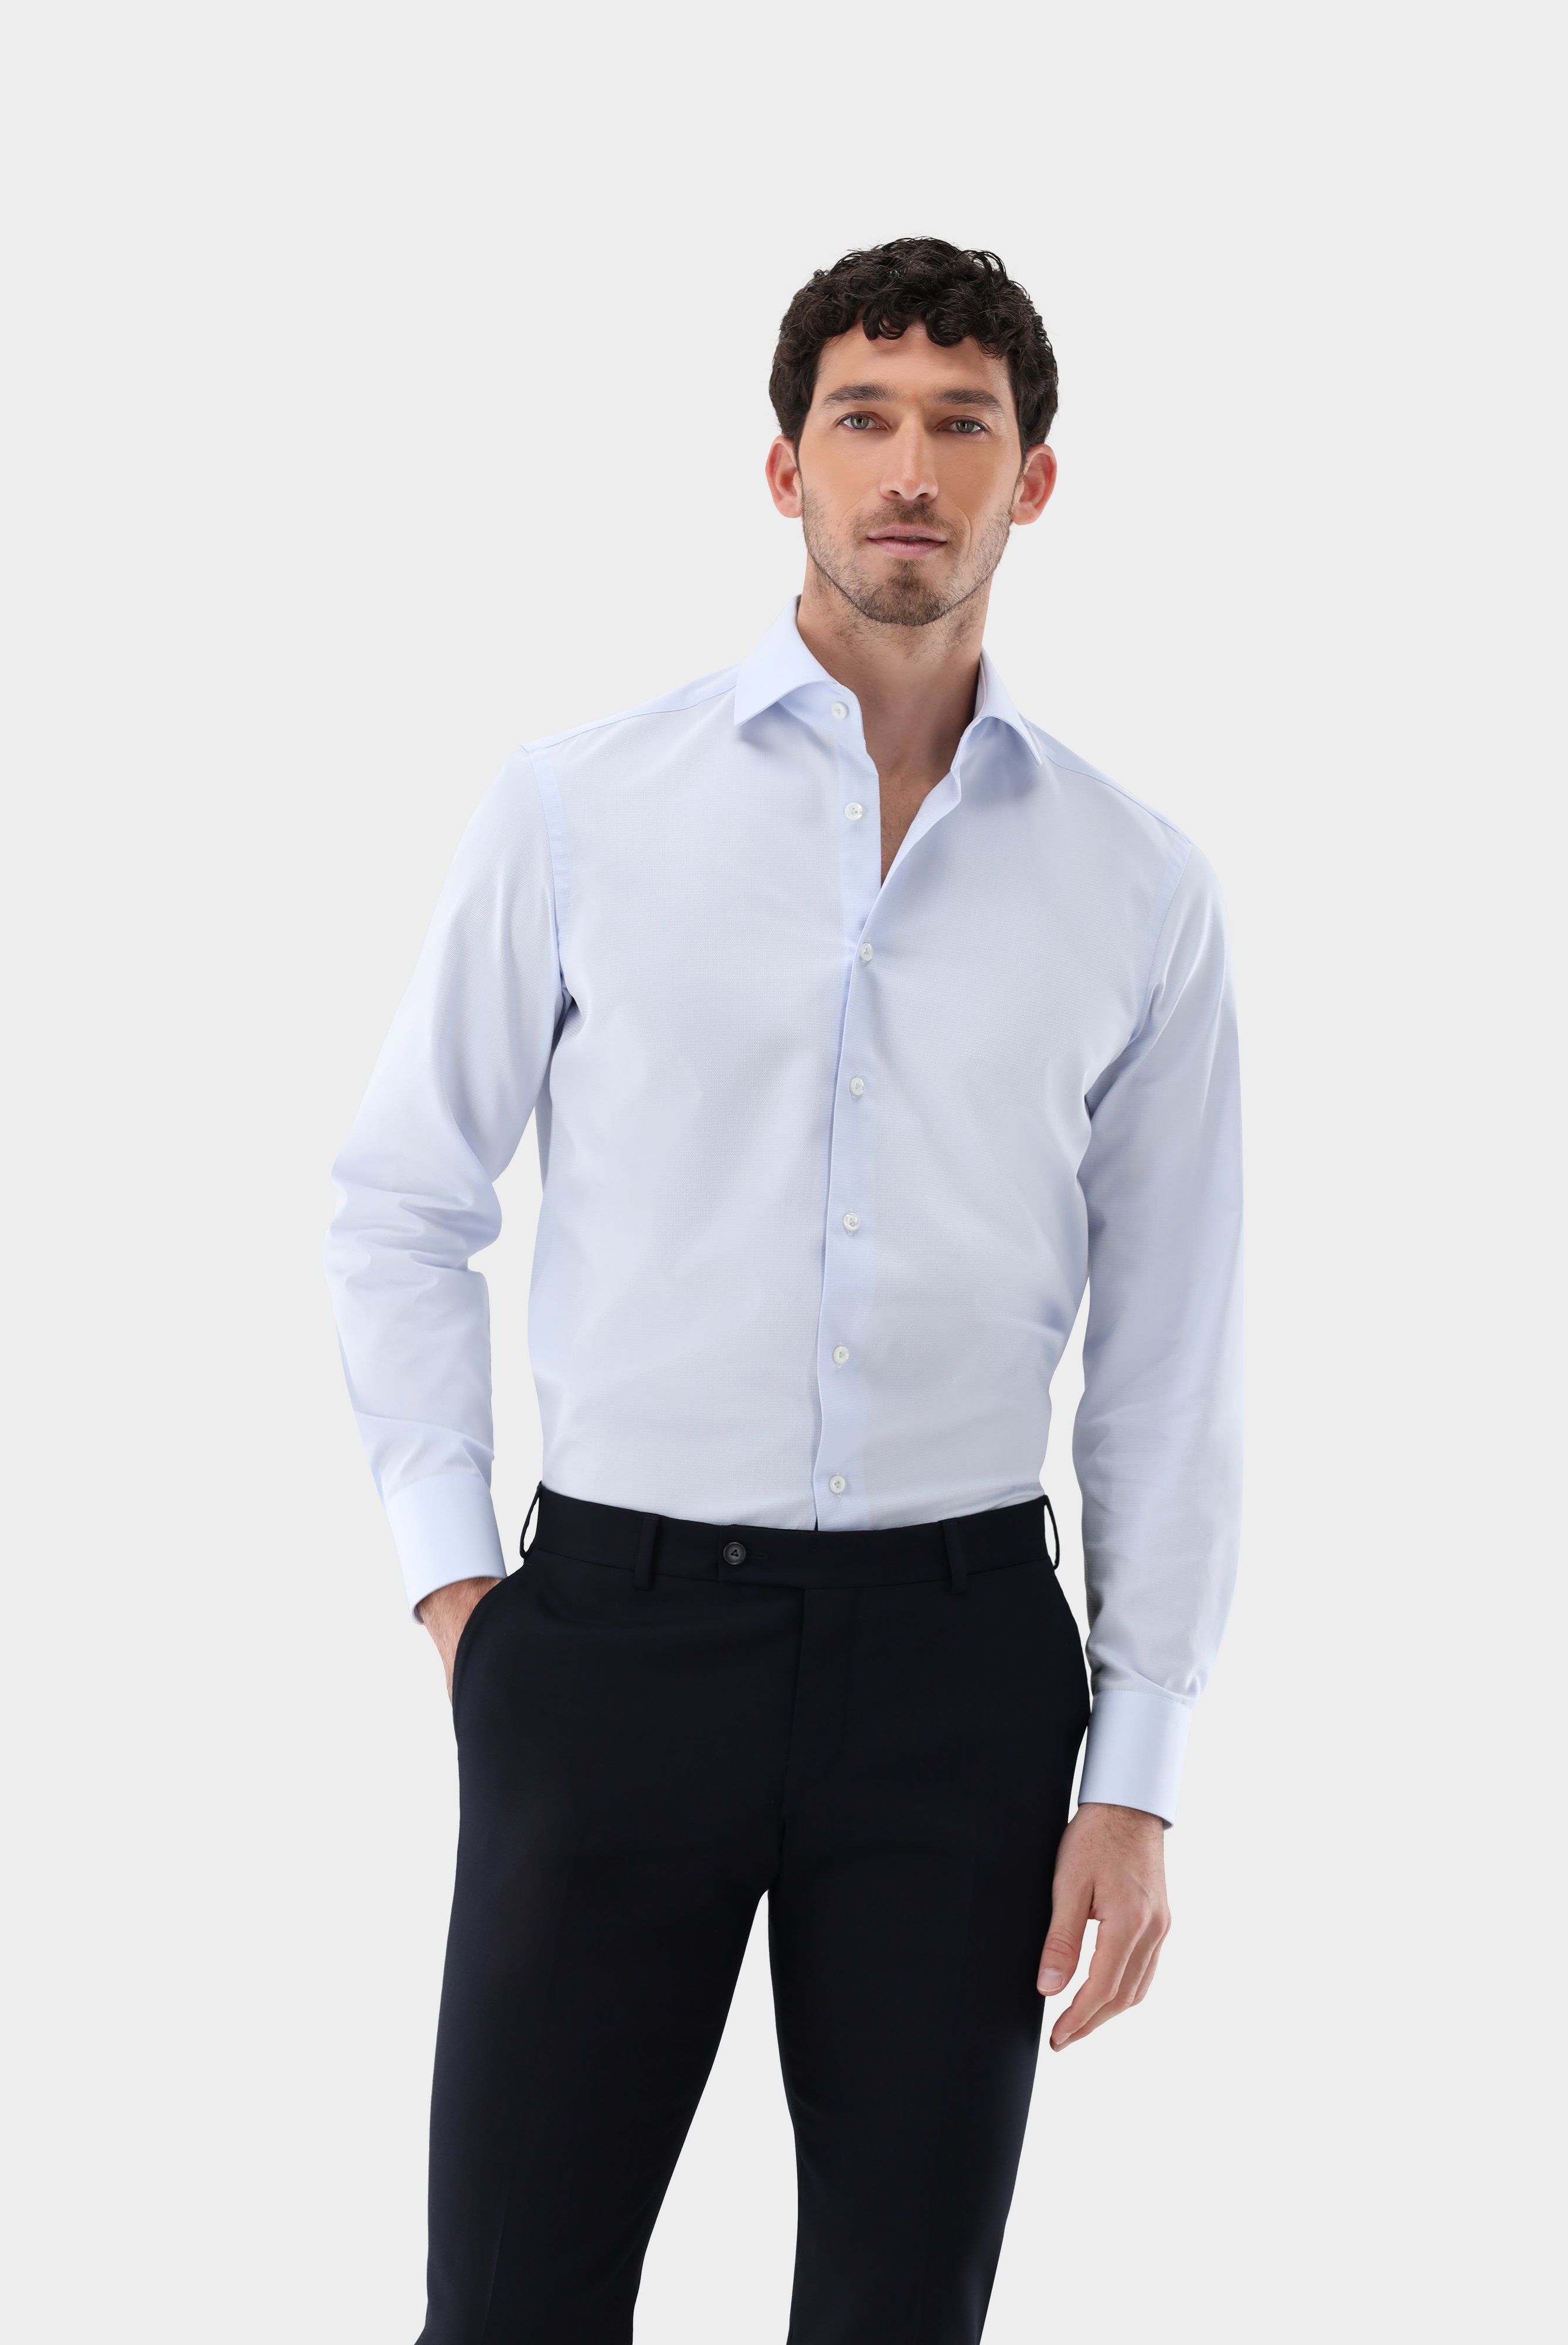 Easy Iron Shirts+Wrinkle Free Twill Shirt with Texture Slim Fit+20.2019.BQ.150301.720.38